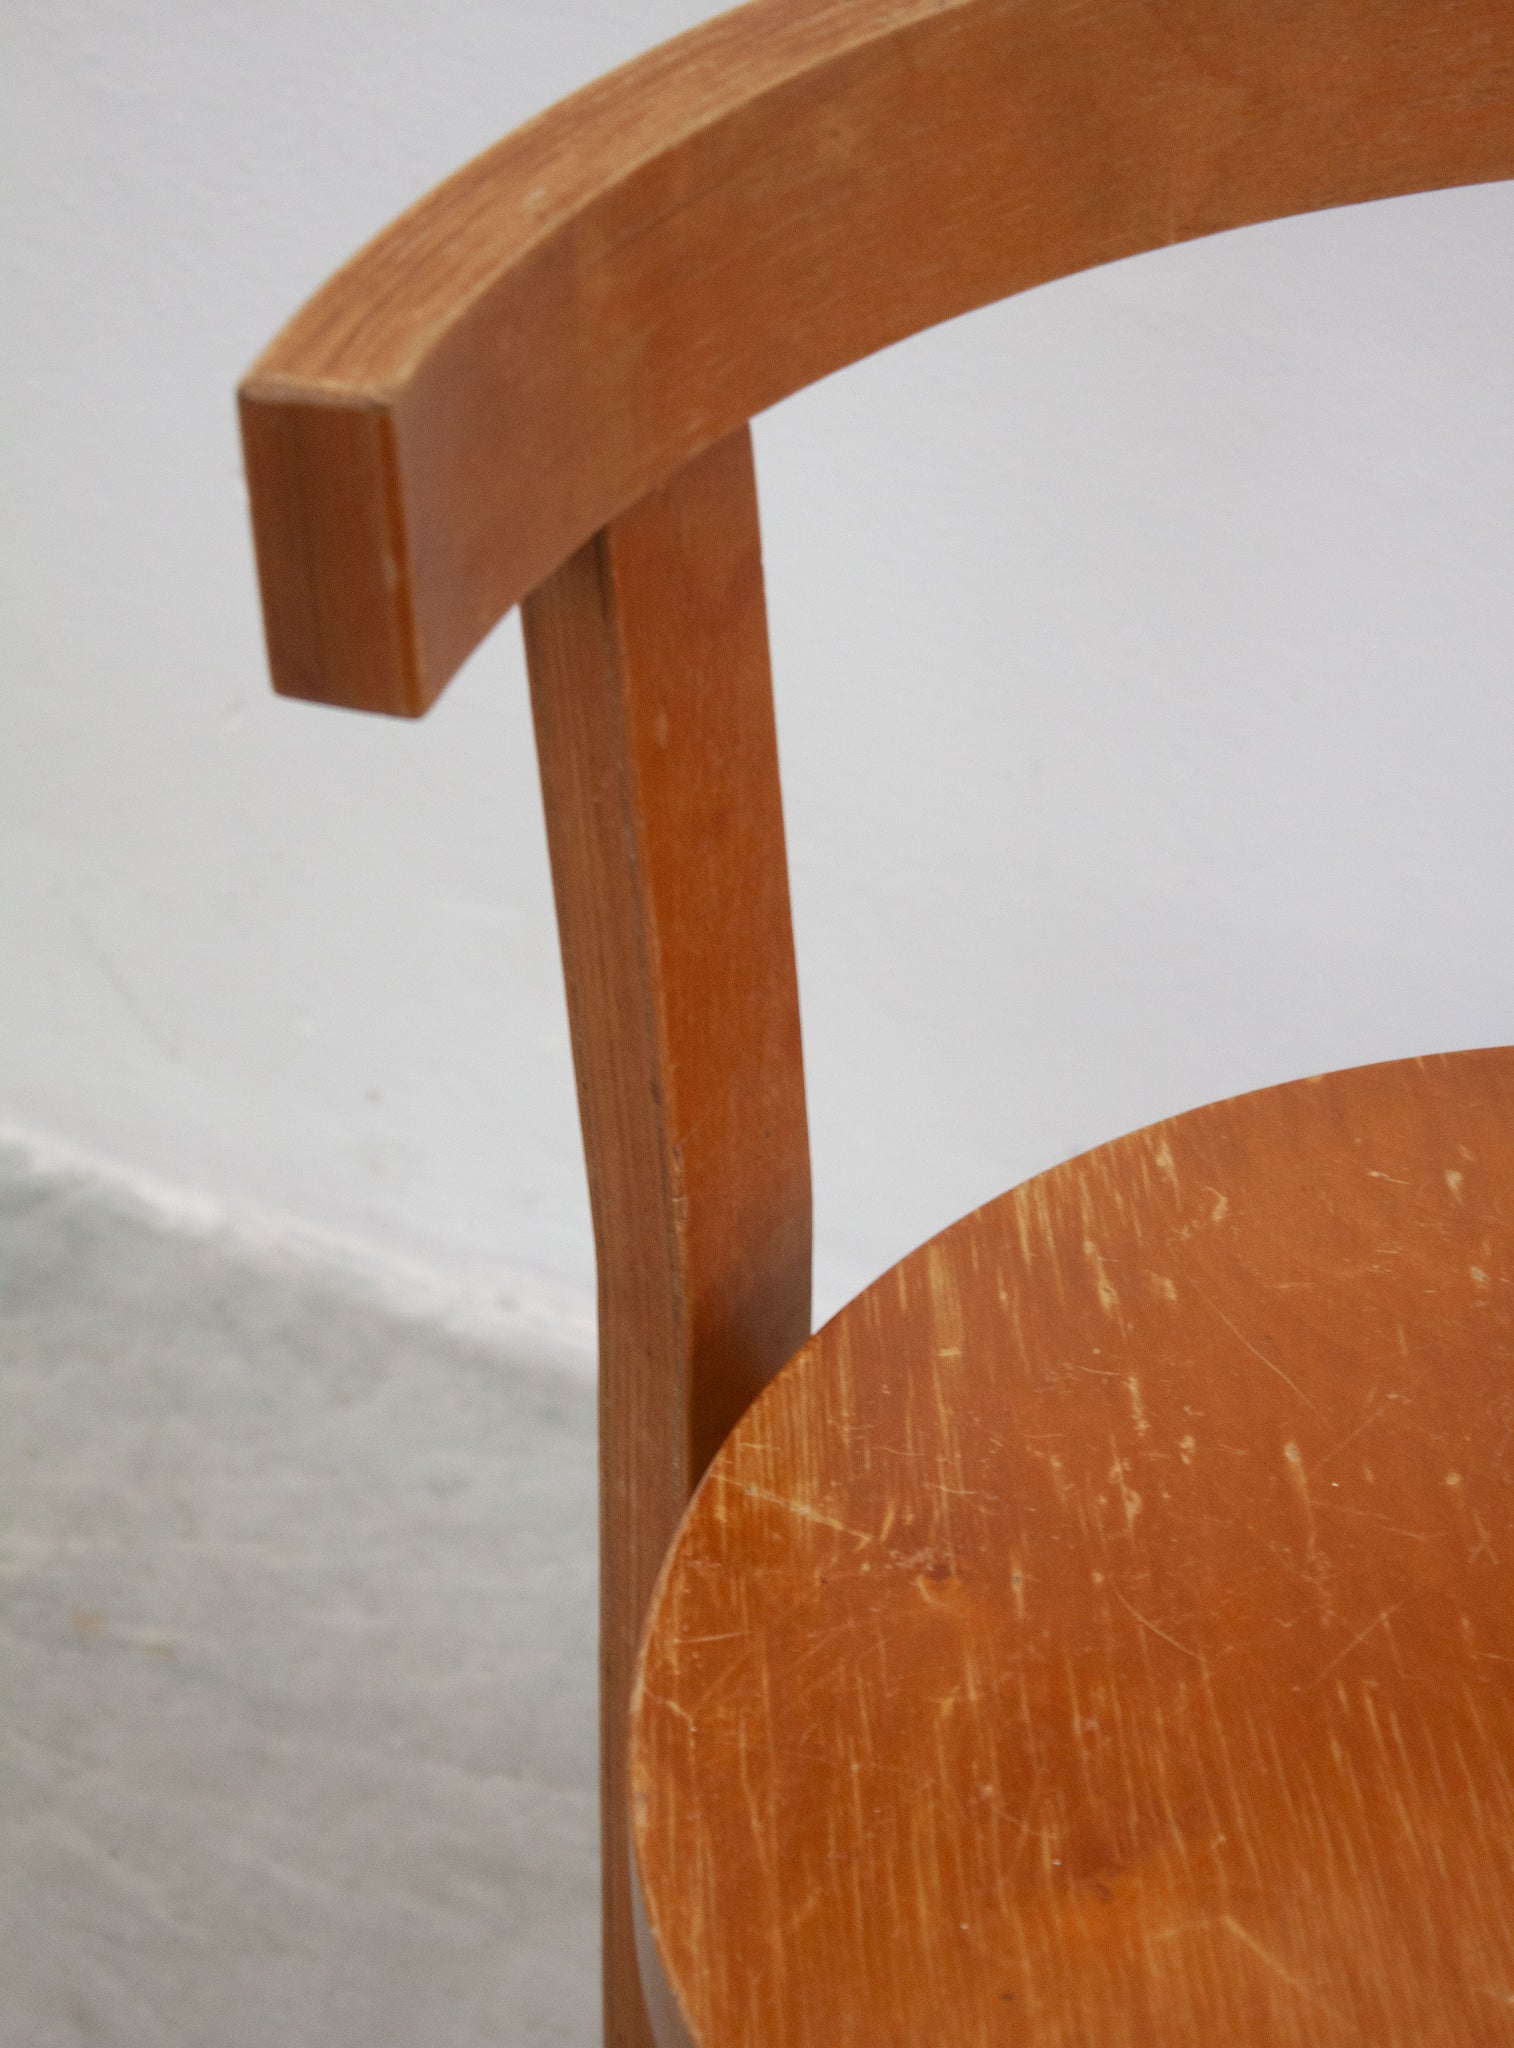 Plywood Chairs in style of Alvar Aalto